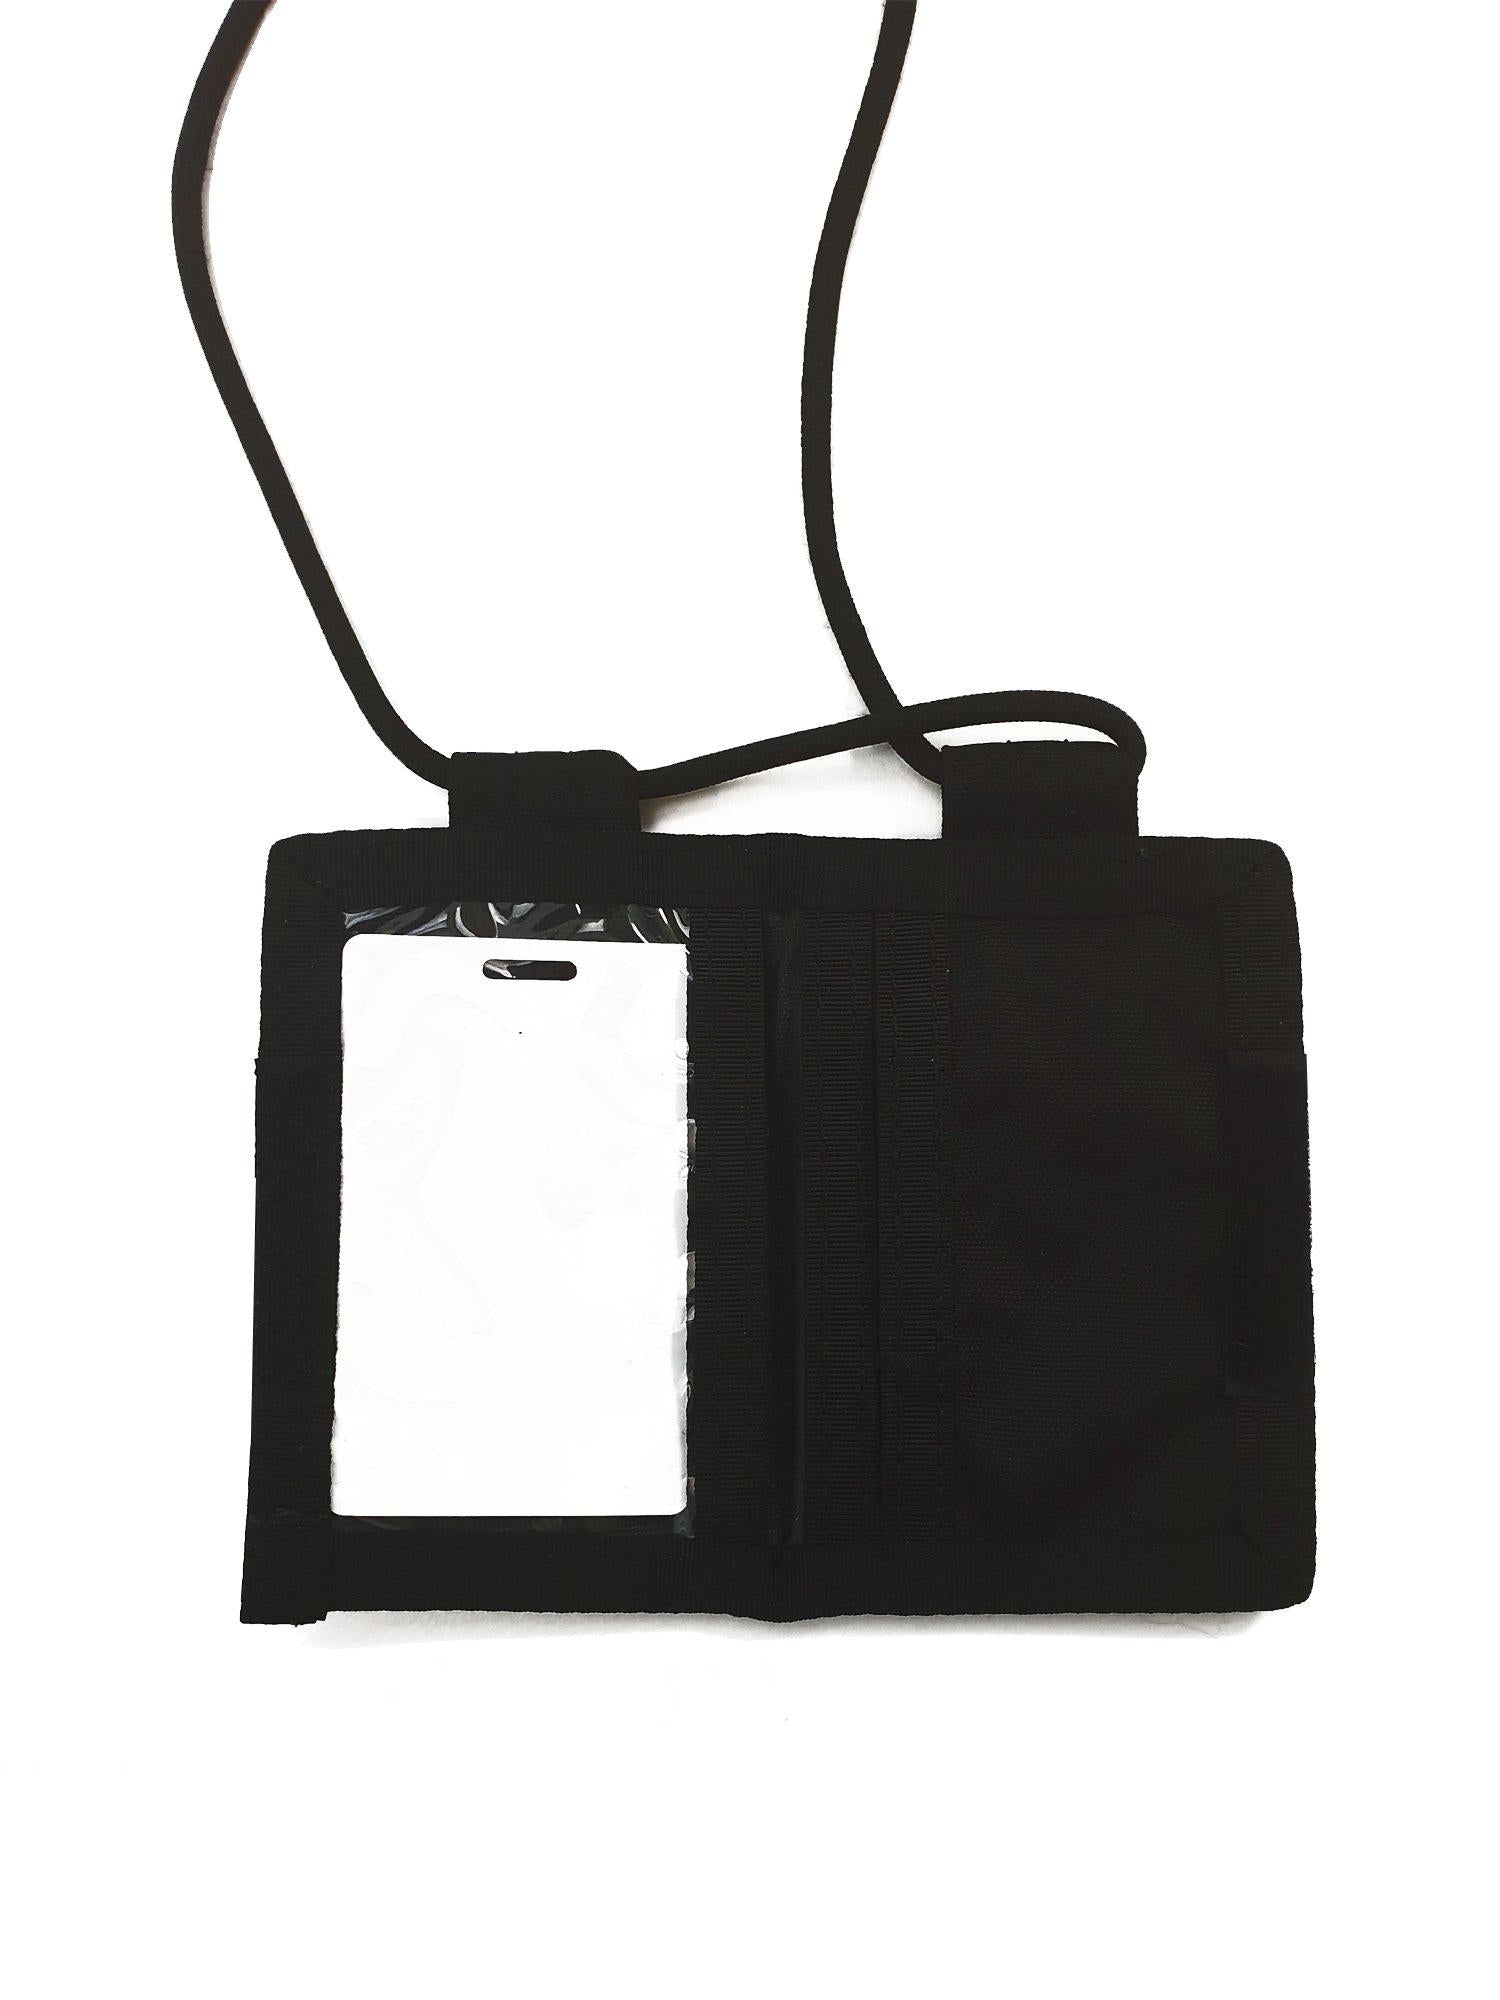 TacSource ID Holder - Small - TacSource